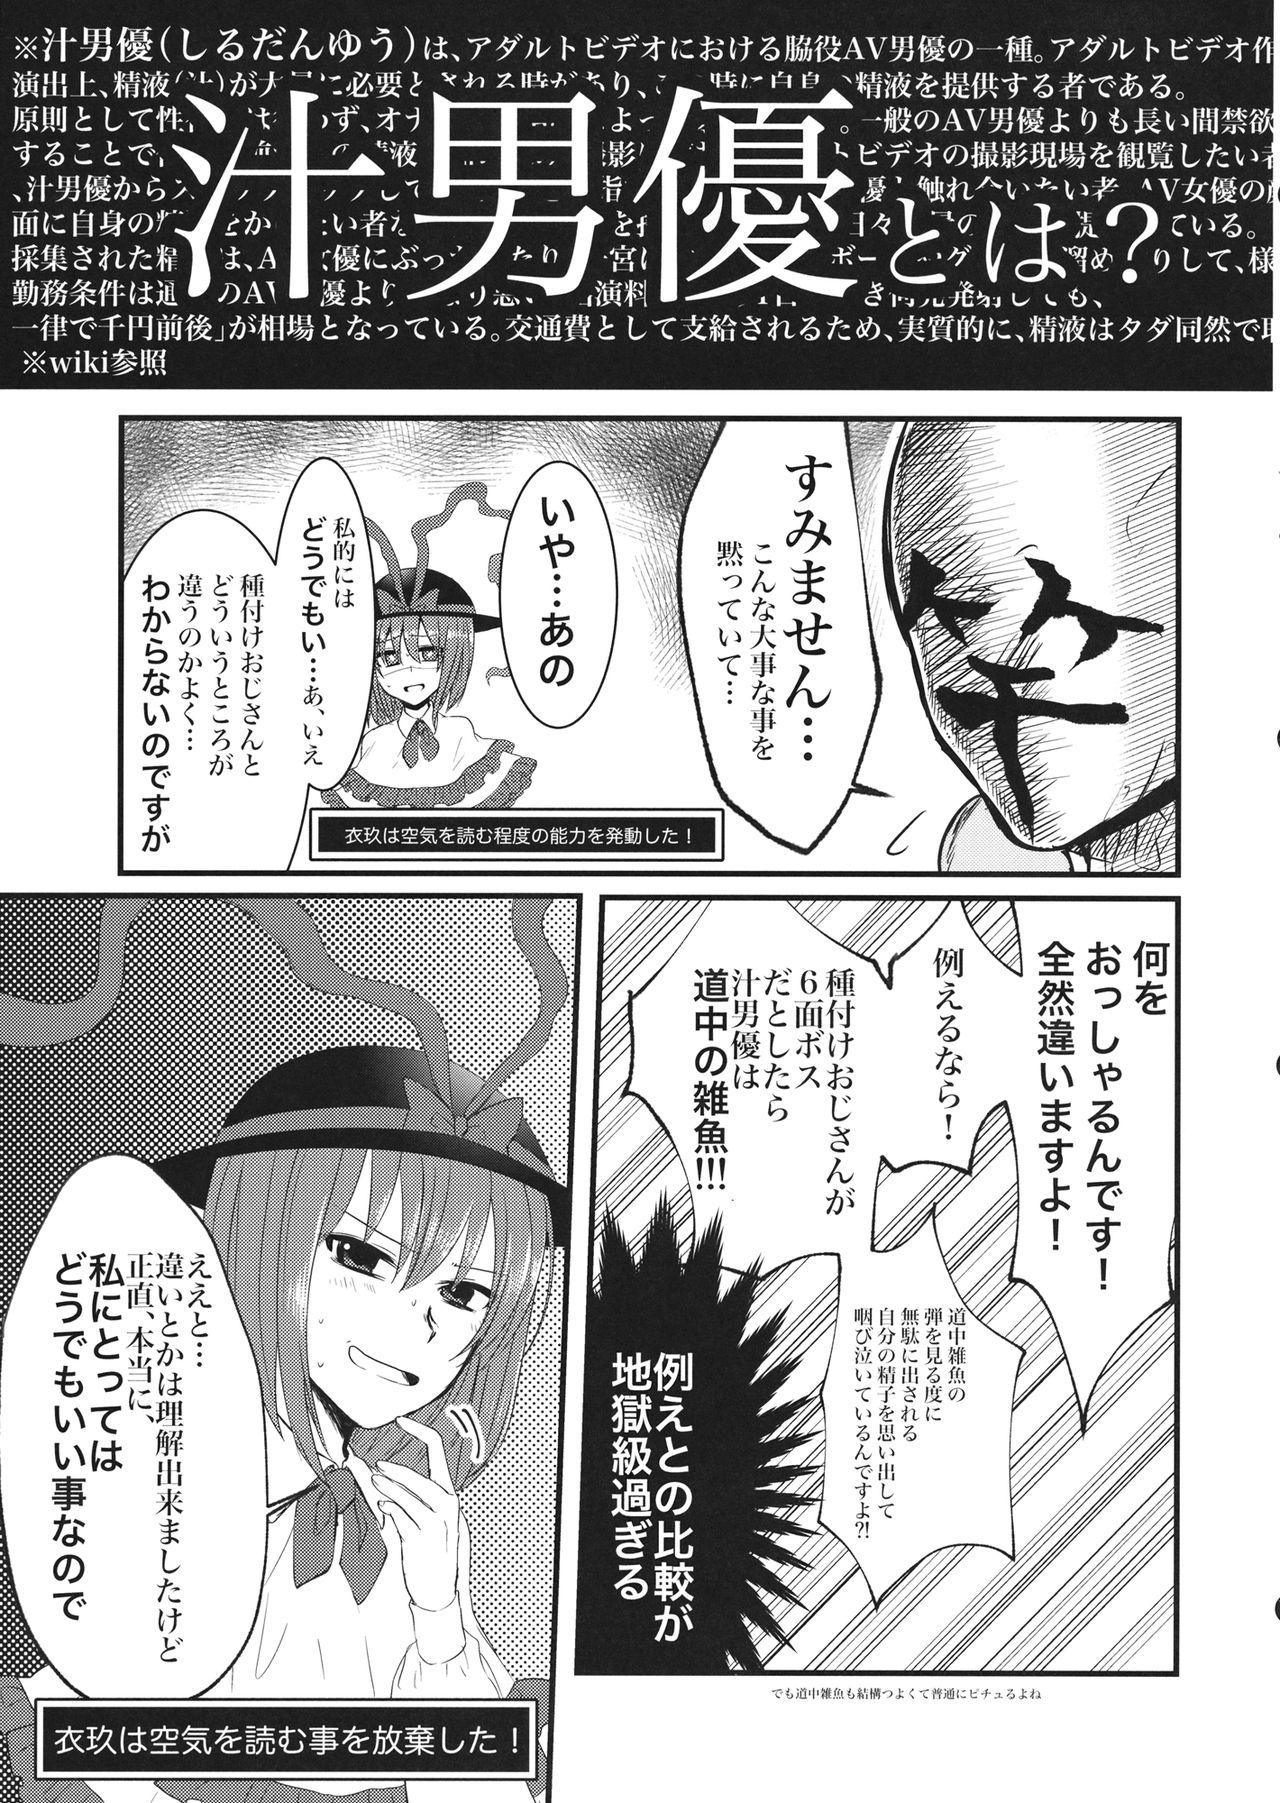 Cougars 衣玖さんと一緒に色々頑張る本 - Touhou project Price - Page 6